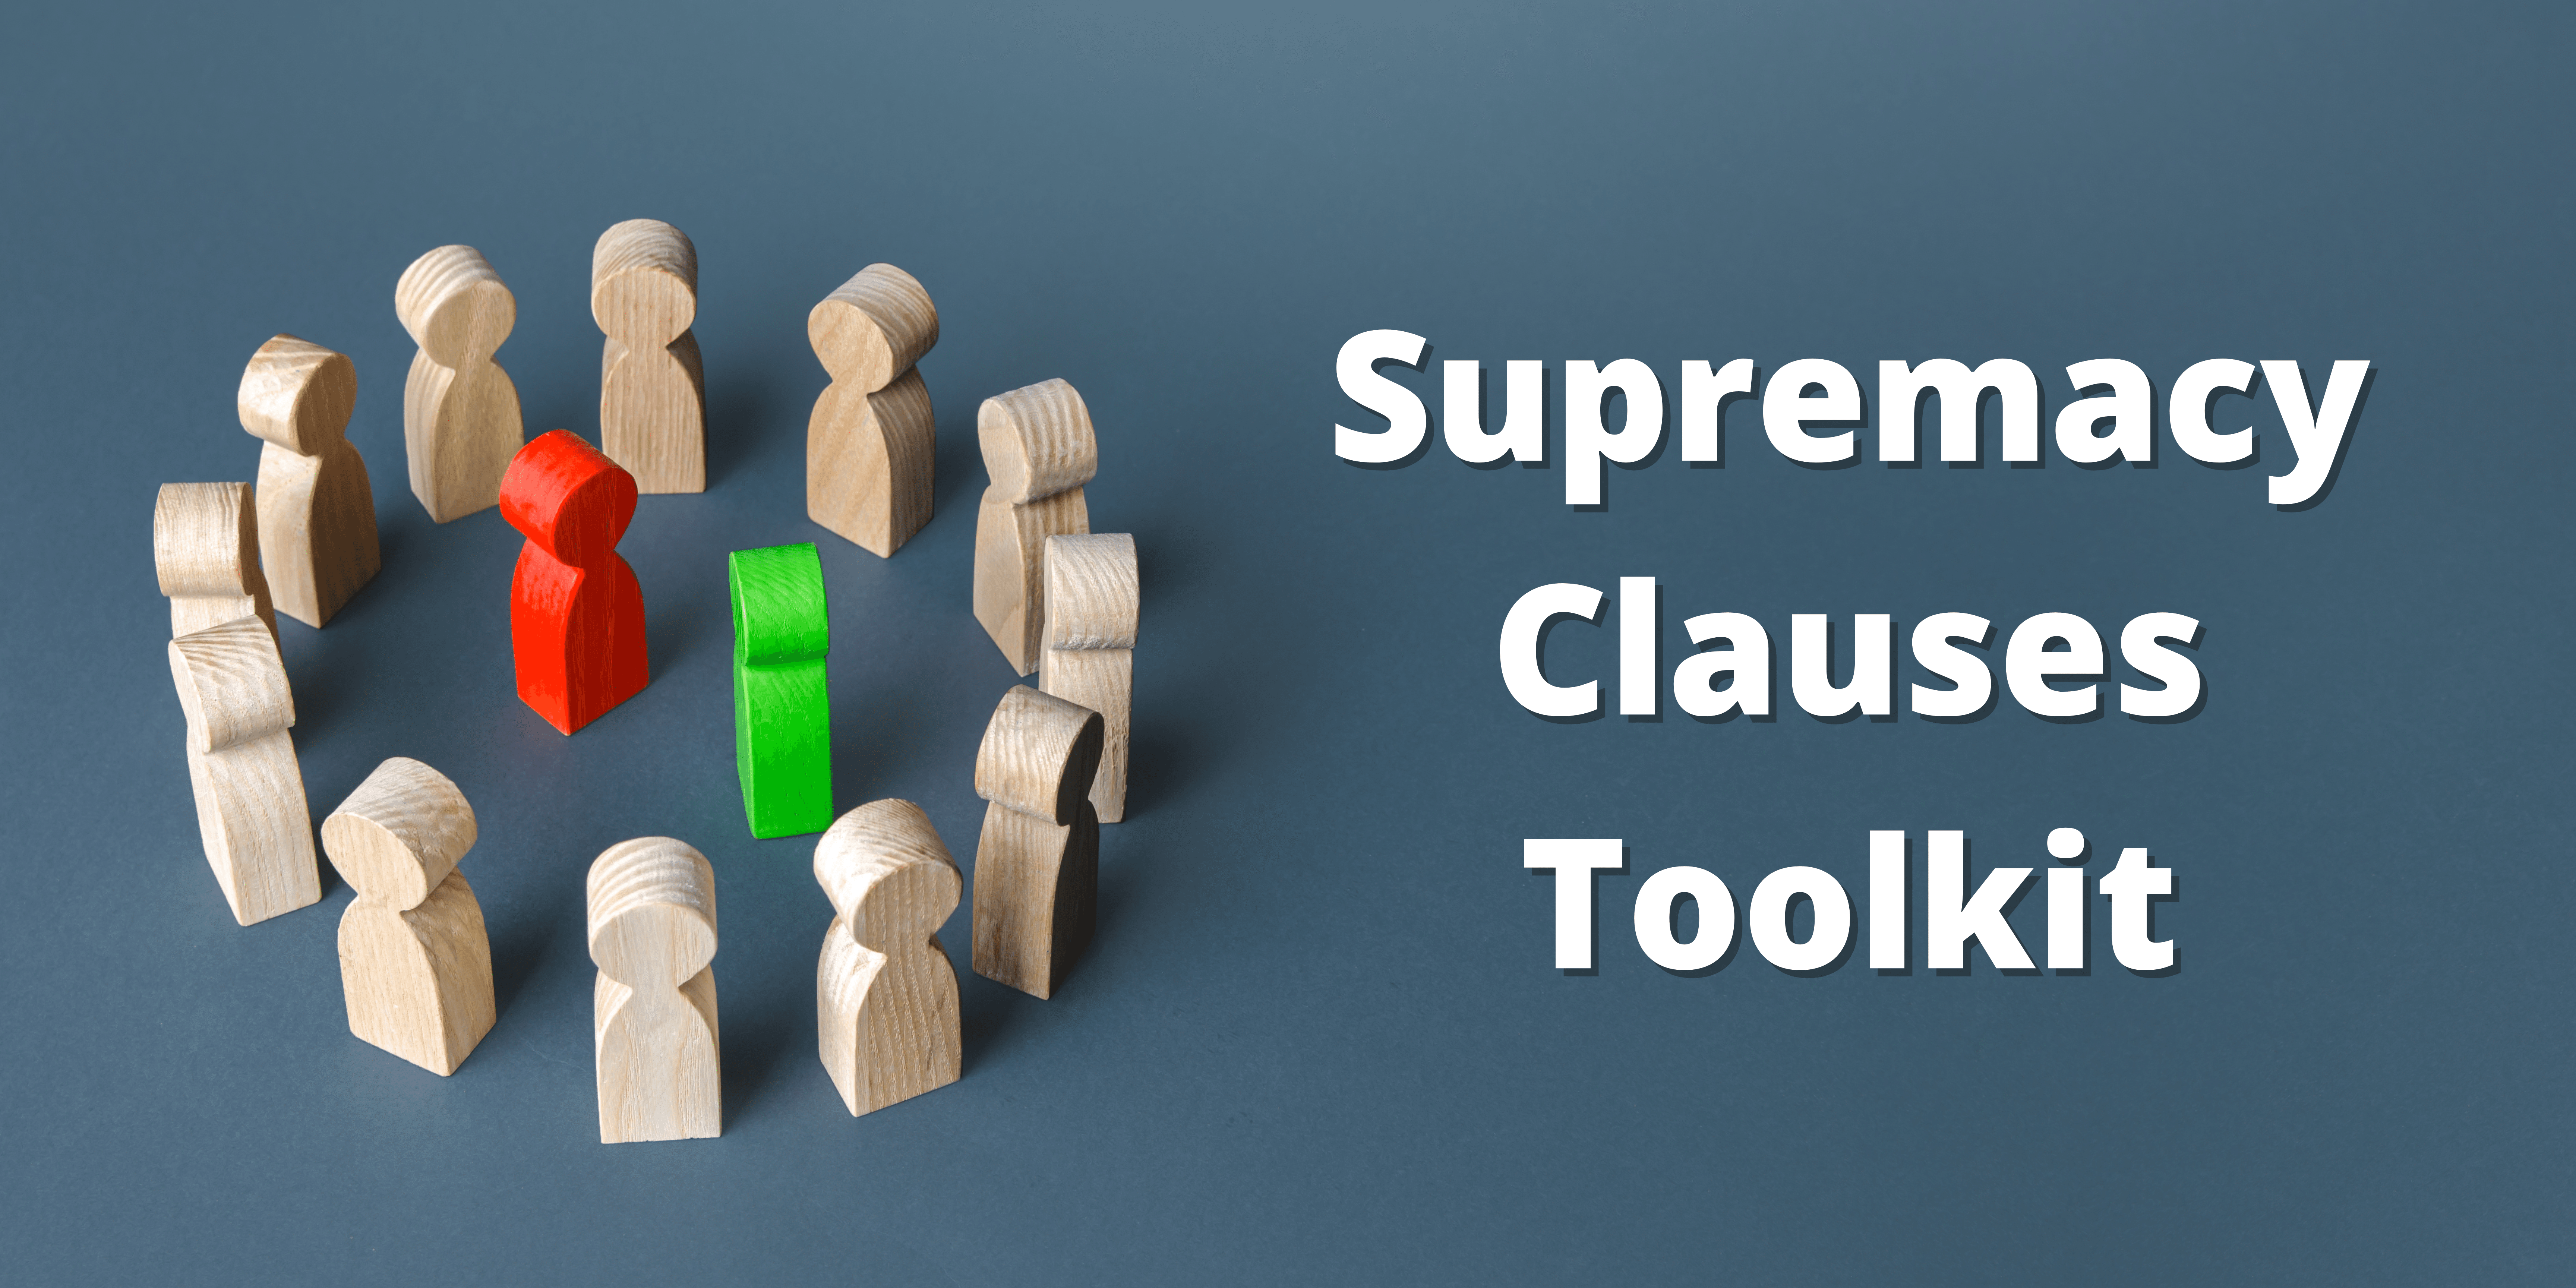 Supremacy Clauses Toolkit